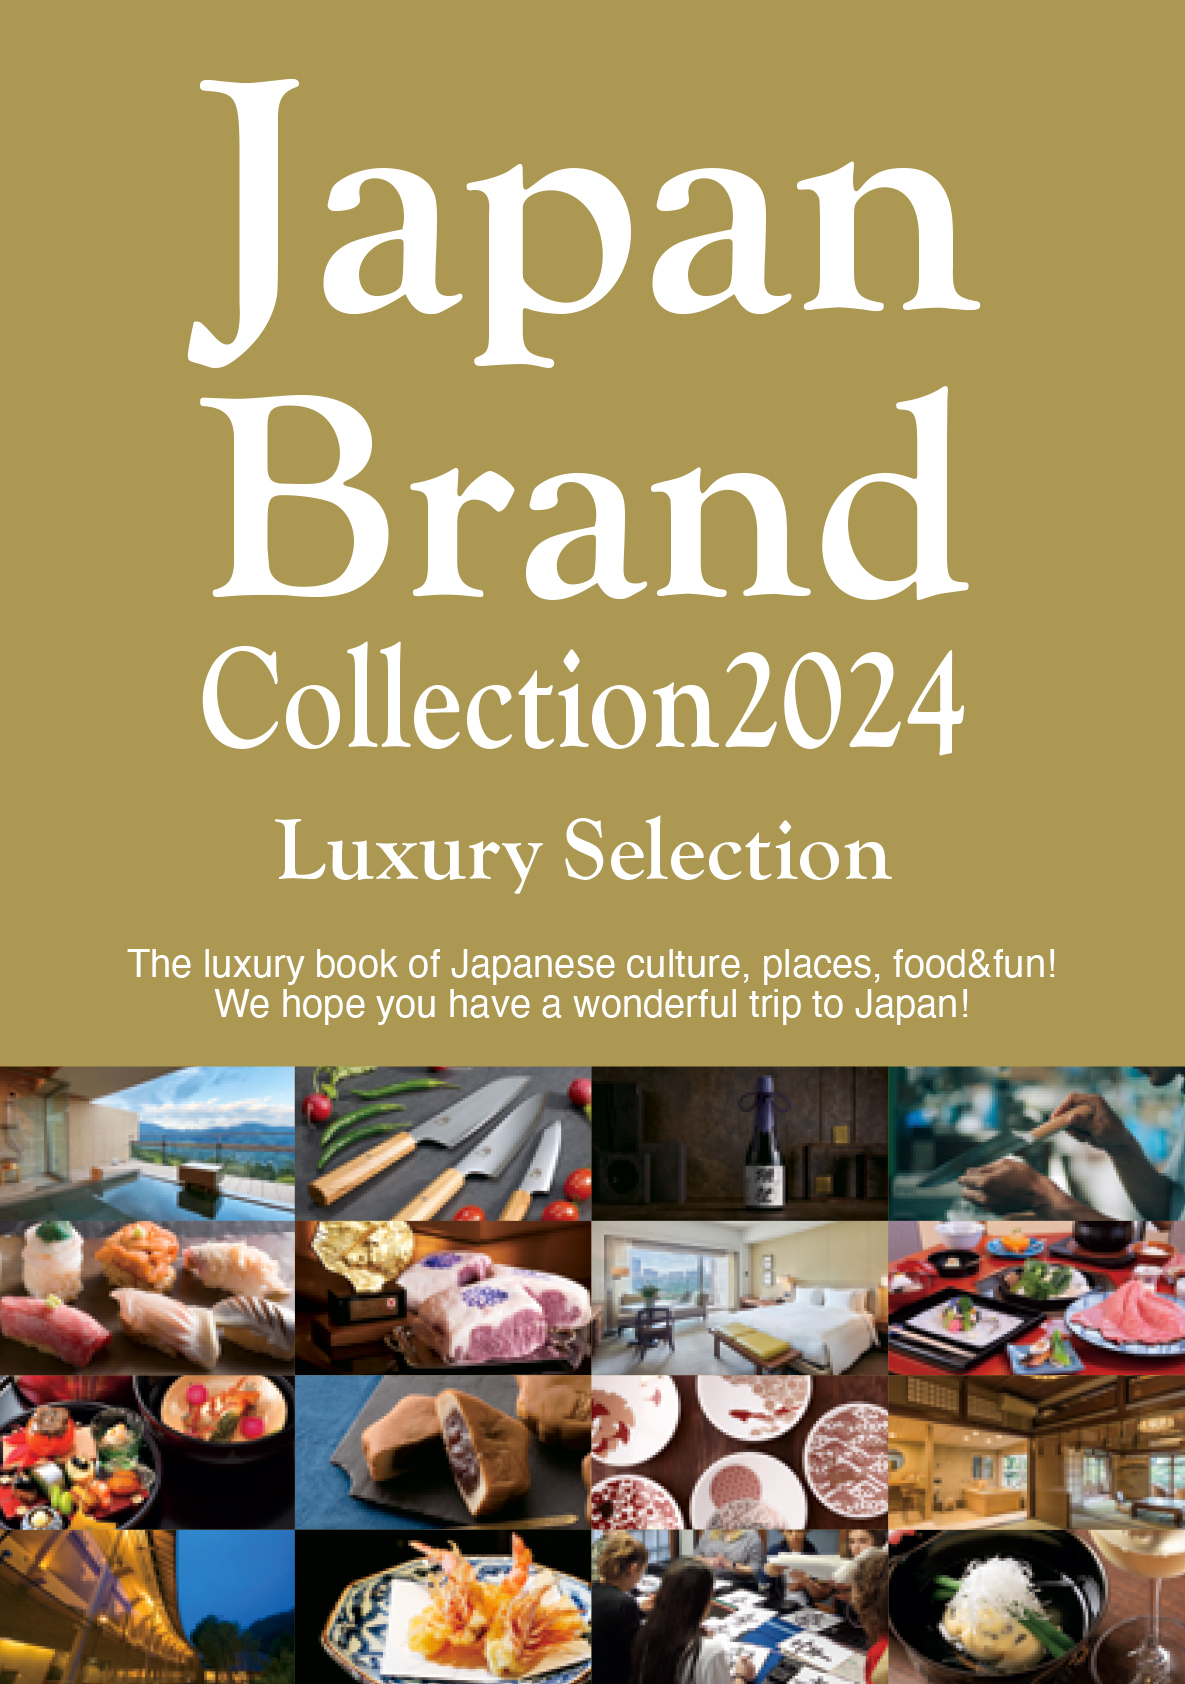 Japan Brand Collection2024 Luxury Selection